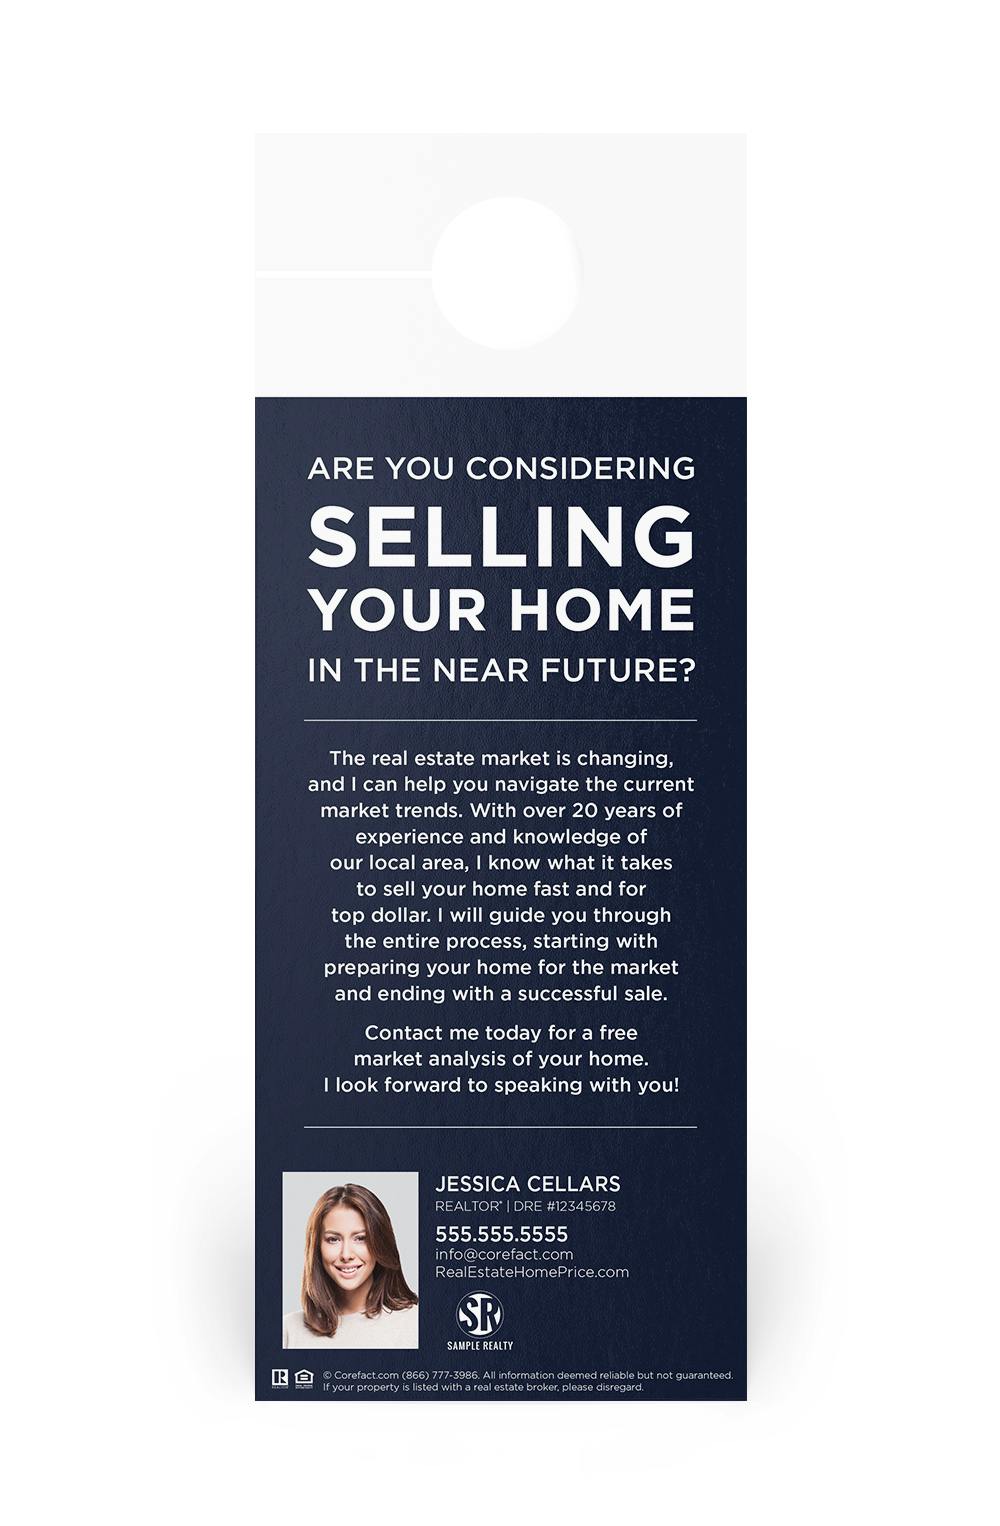 Are you considering selling your home in the near future? Door hanger